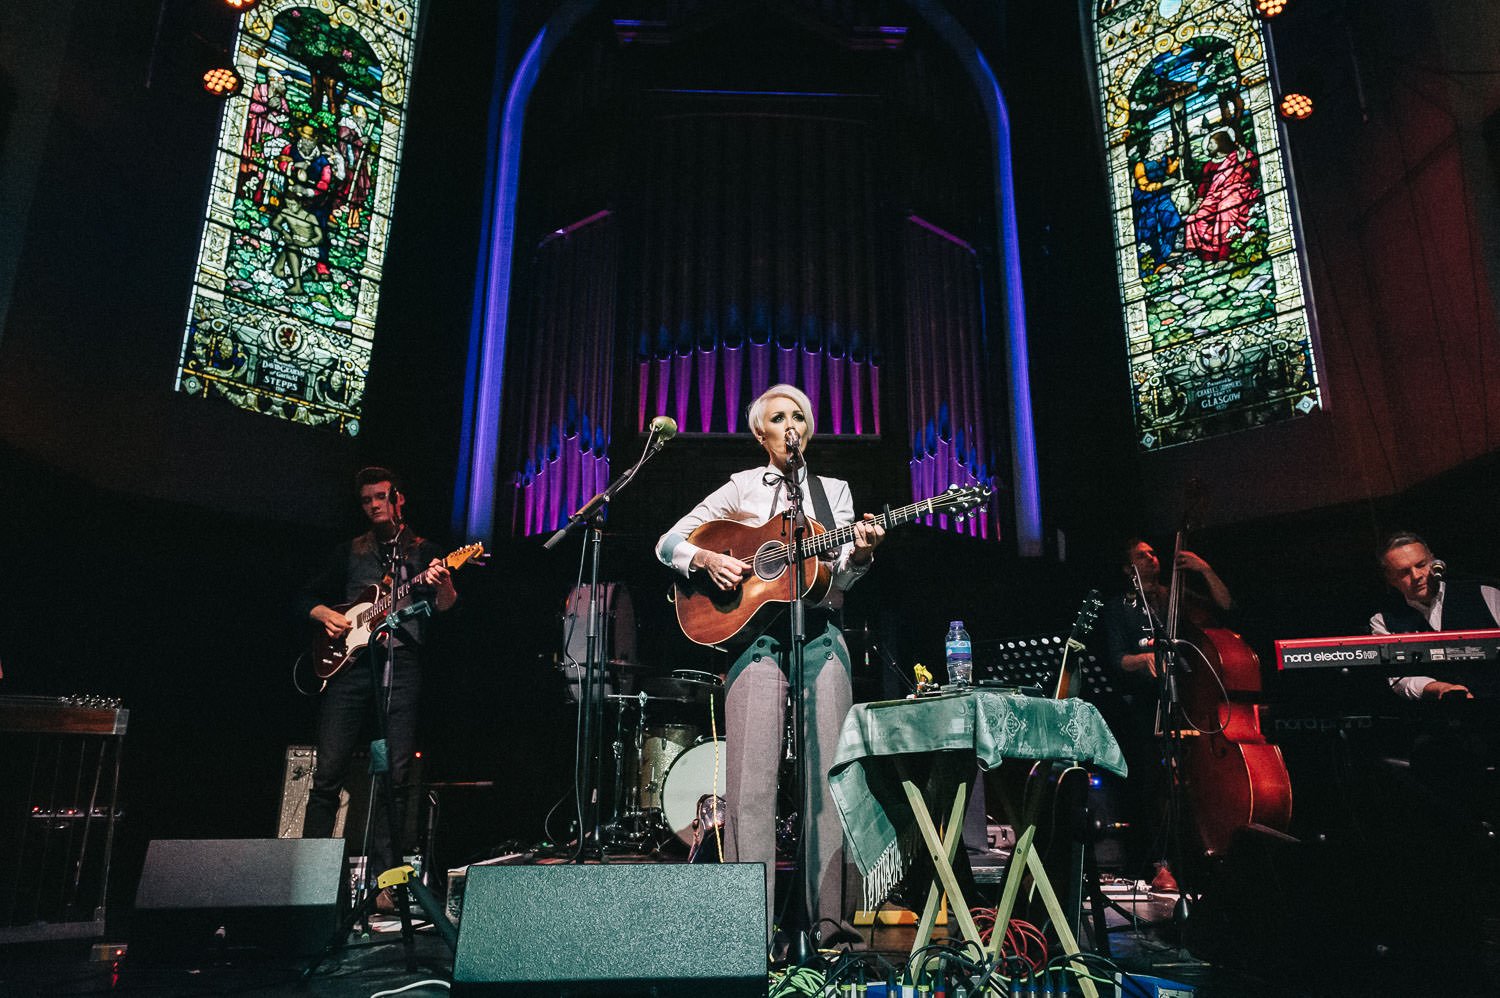 "ARE WE THERE YET?" ALBUM LAUNCH AT SAINT LUKE'S, MAY 2018